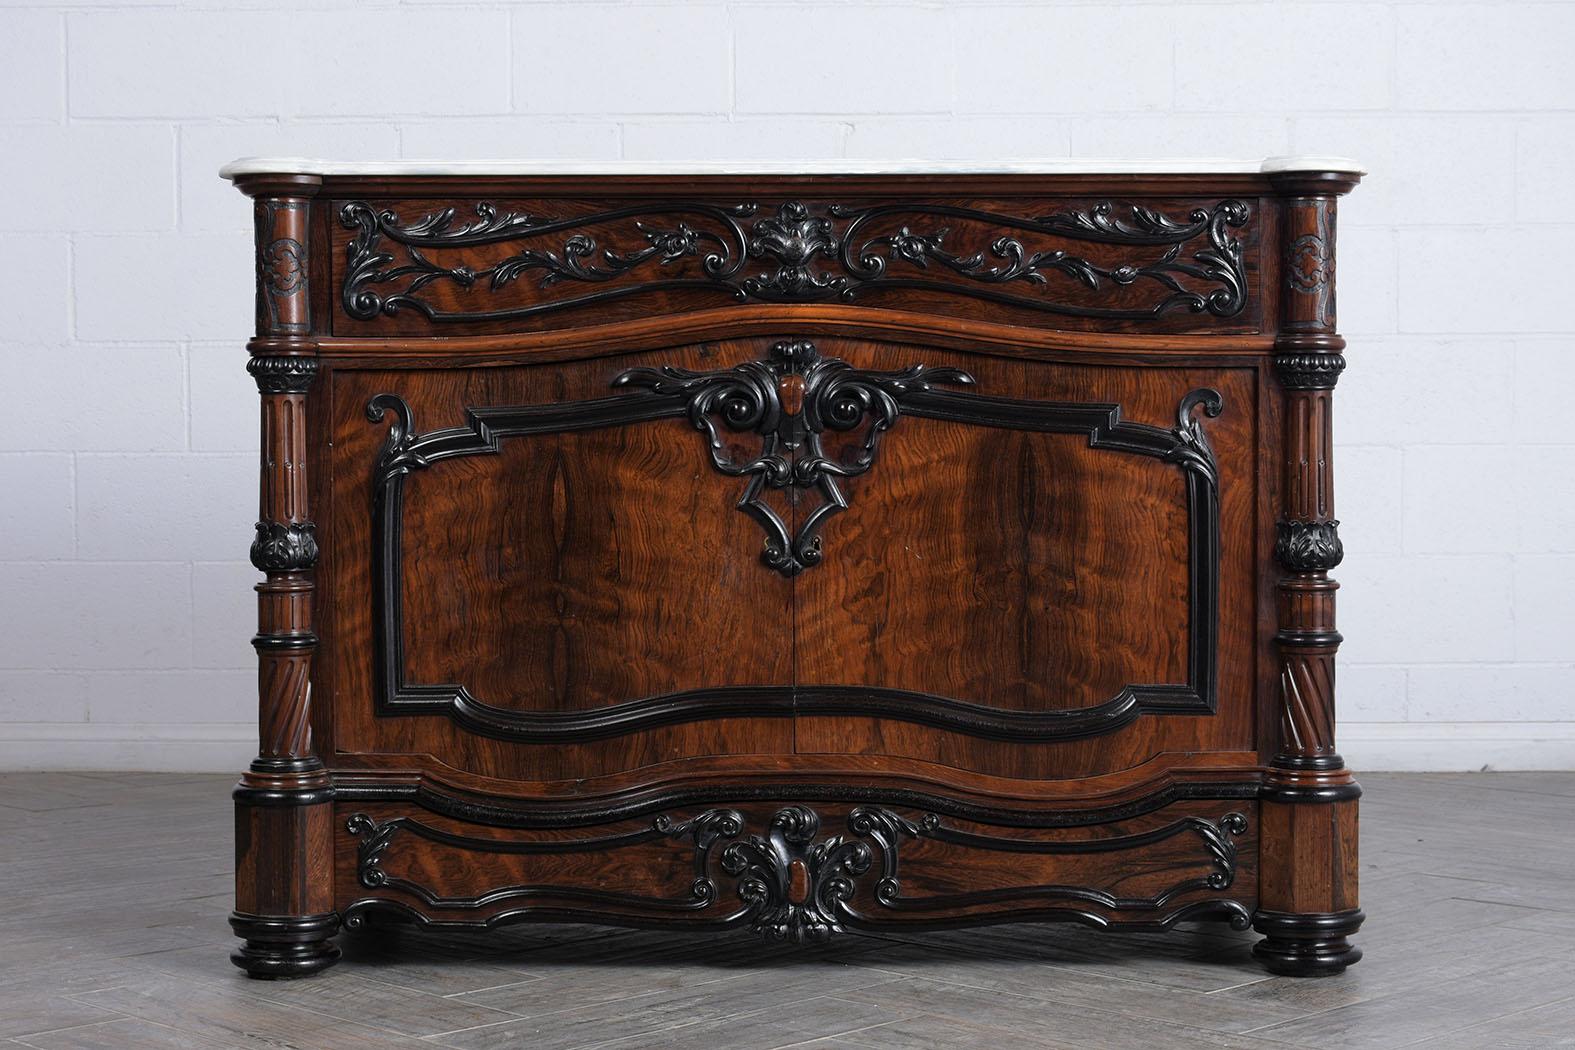 This Early 19th Century Regency Style Chest of Drawers is made out of solid rosewood and has its original mahogany & black color staining and has a newly lacquered finish. This antique dresser features a beveled white marble top, a large top drawer,